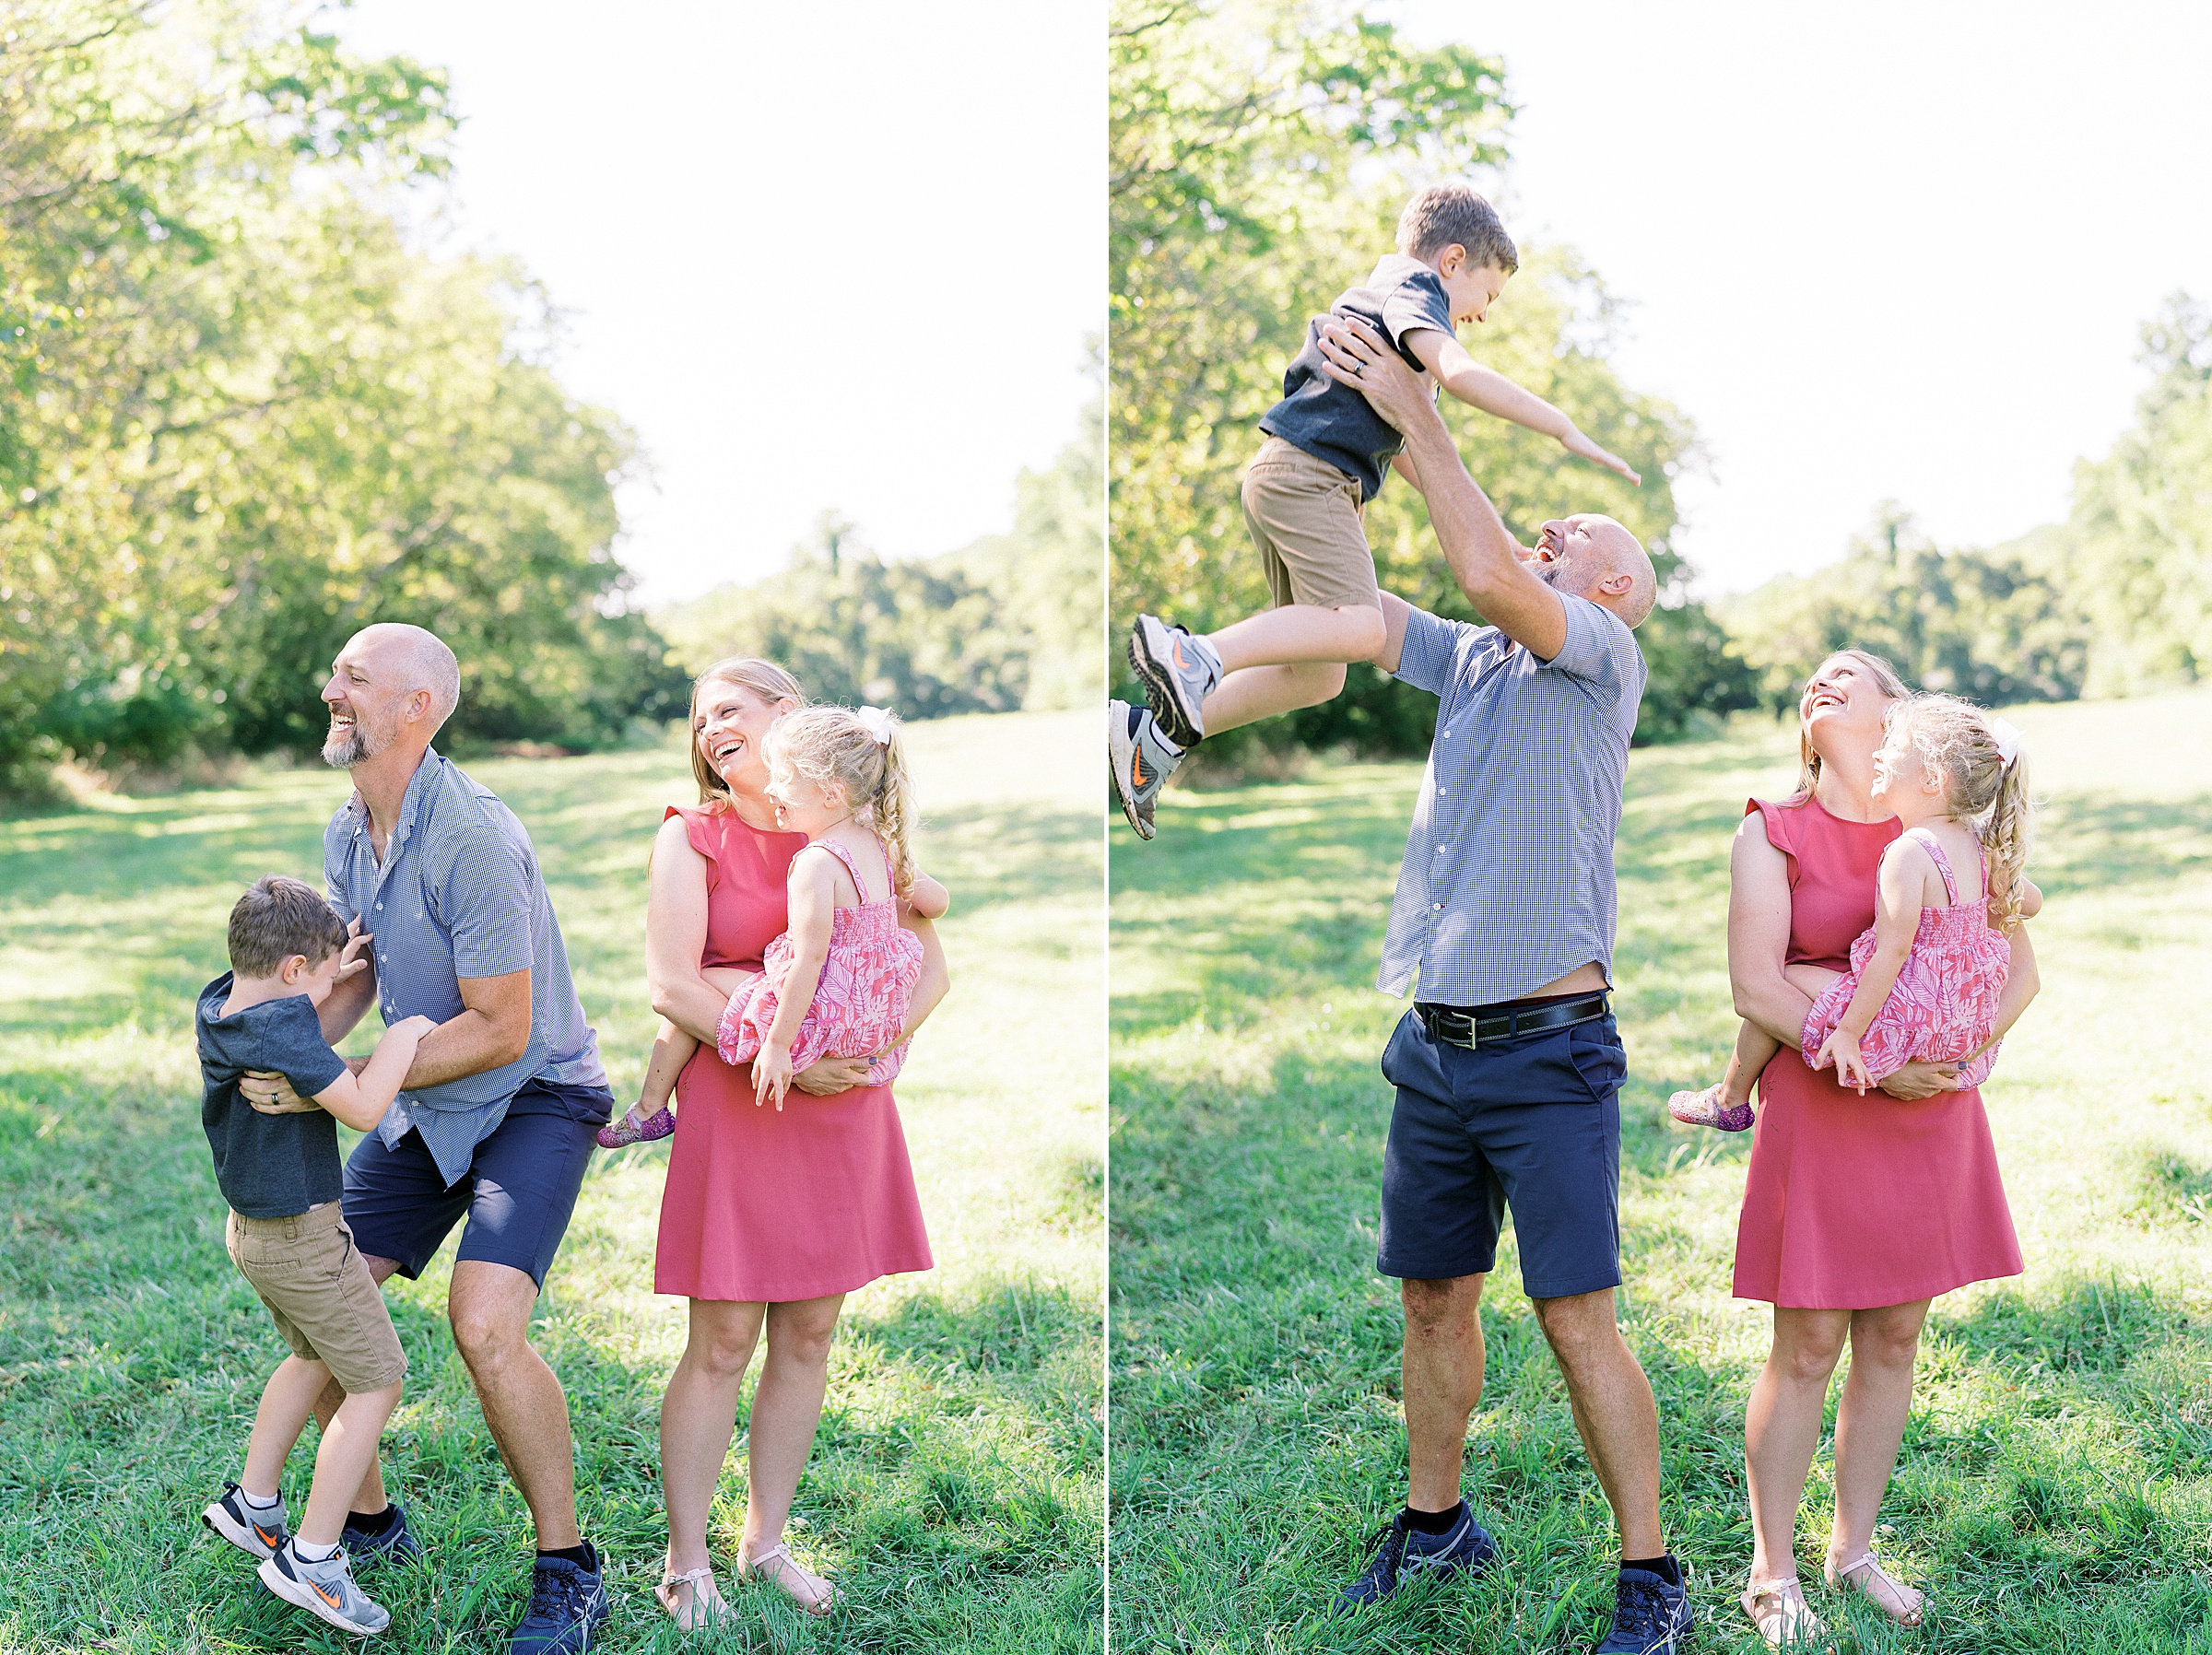 dad lifts son up in the air as wife and daughter watch and laugh